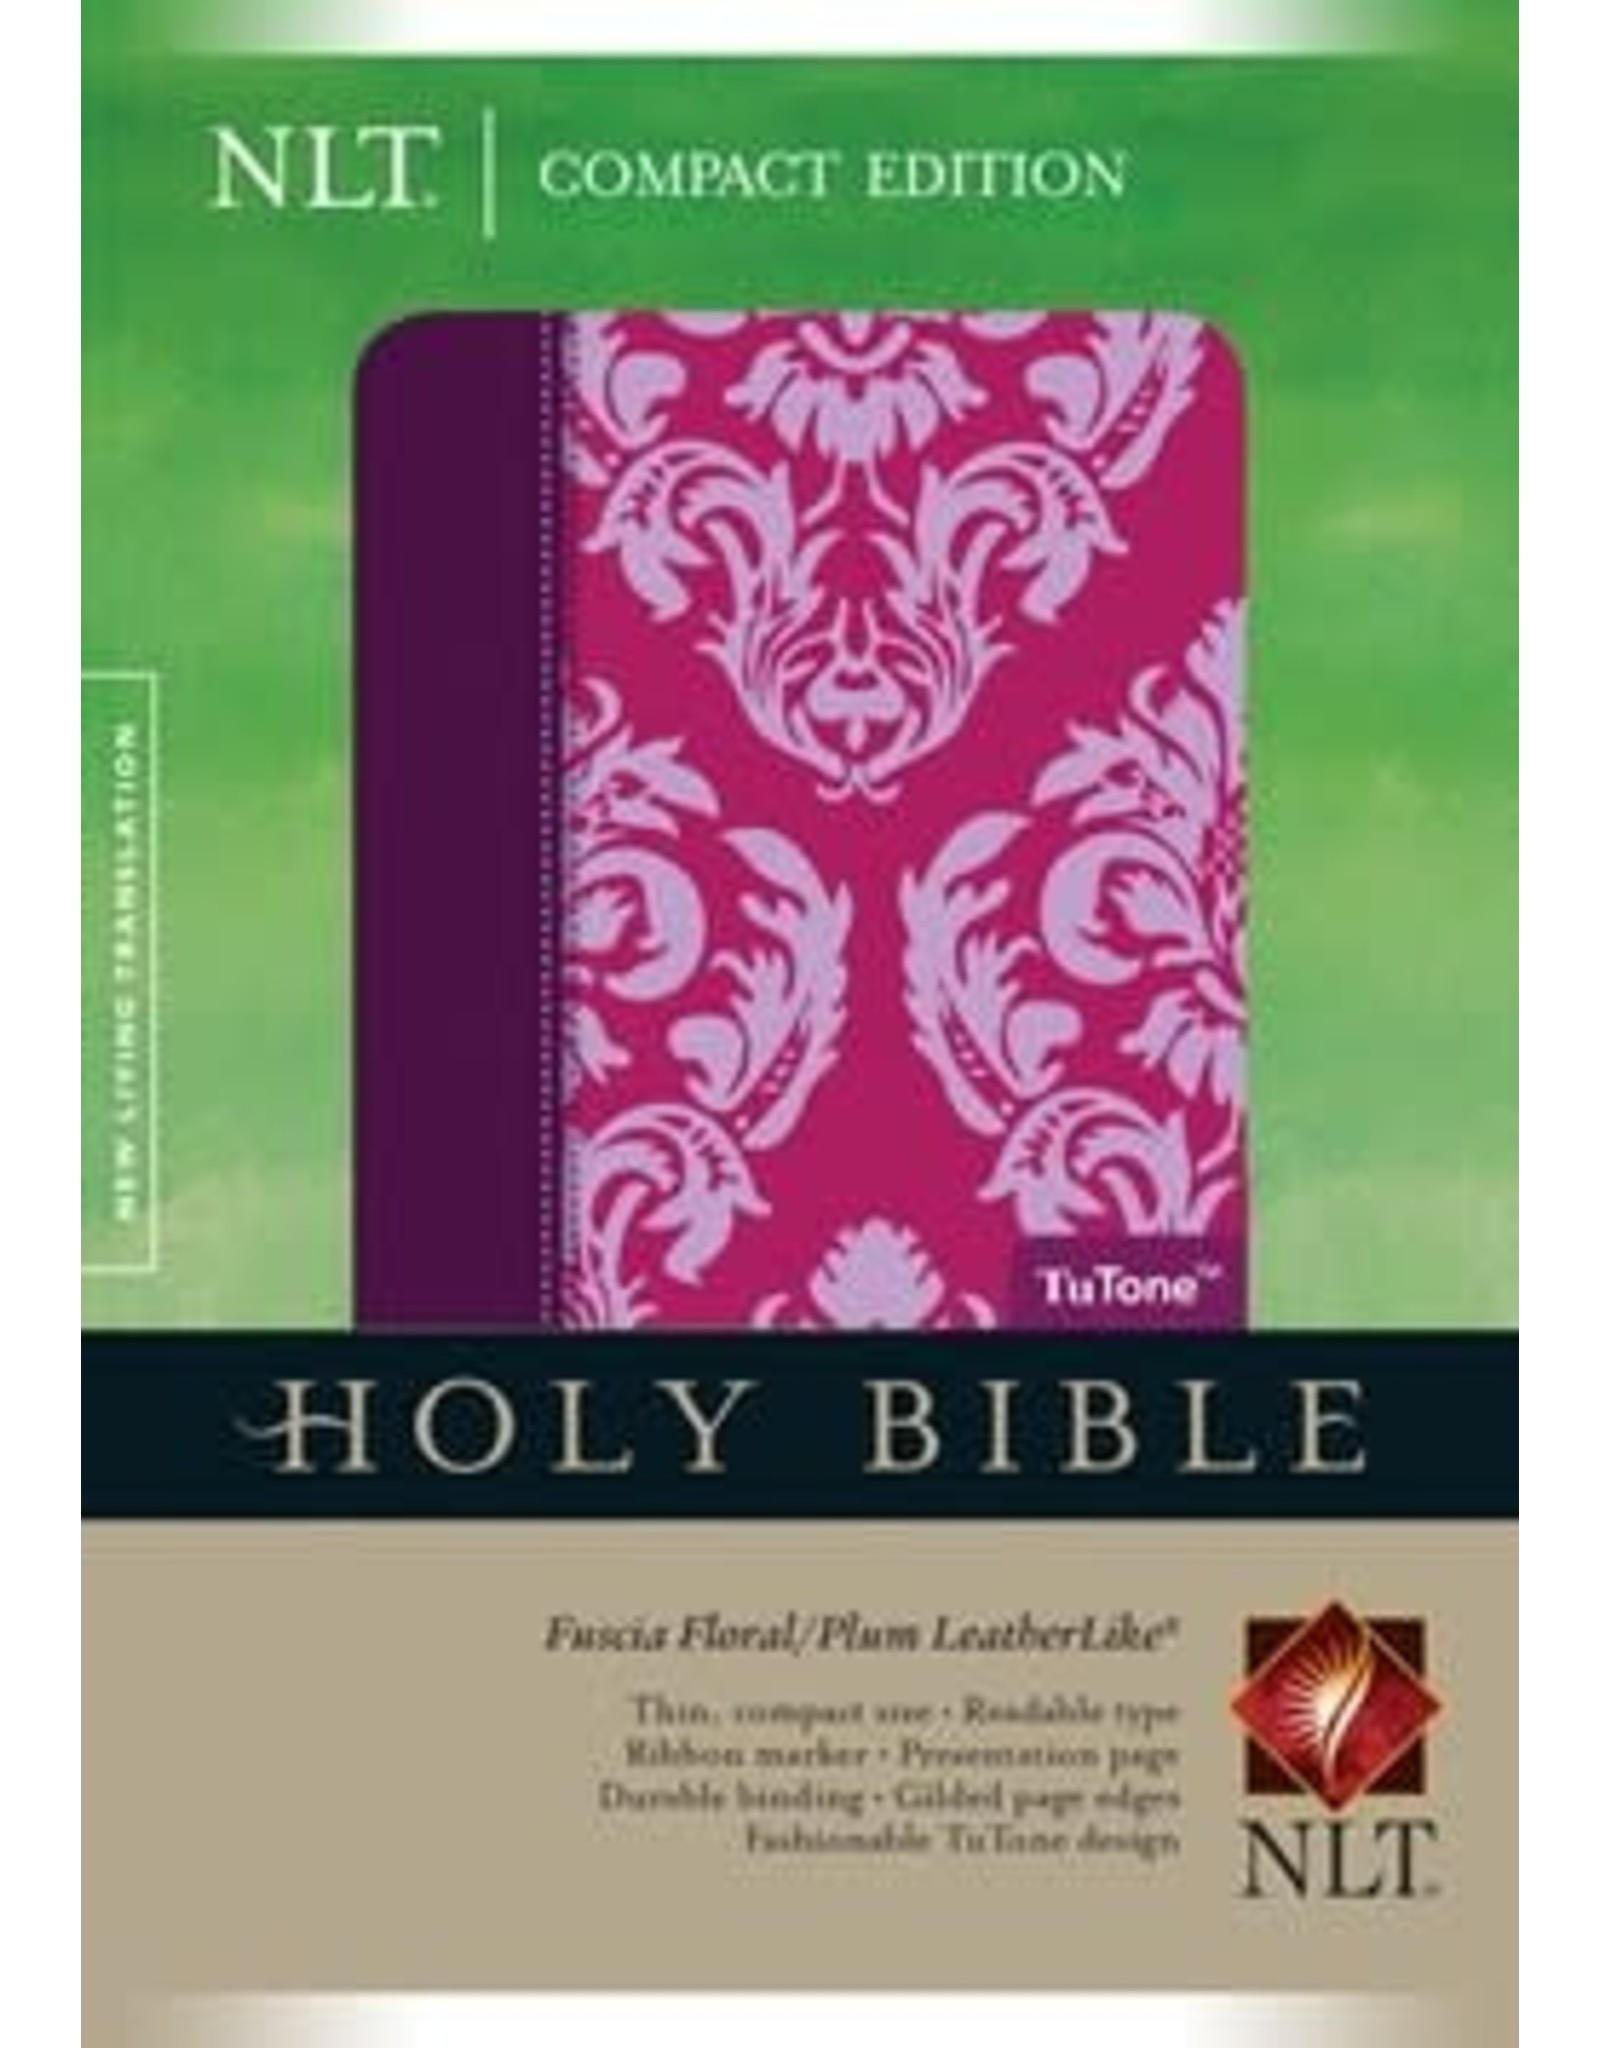 Compact Edition Bible NLT (LeatherLike, Fuchsia Floral/Plum Floral )